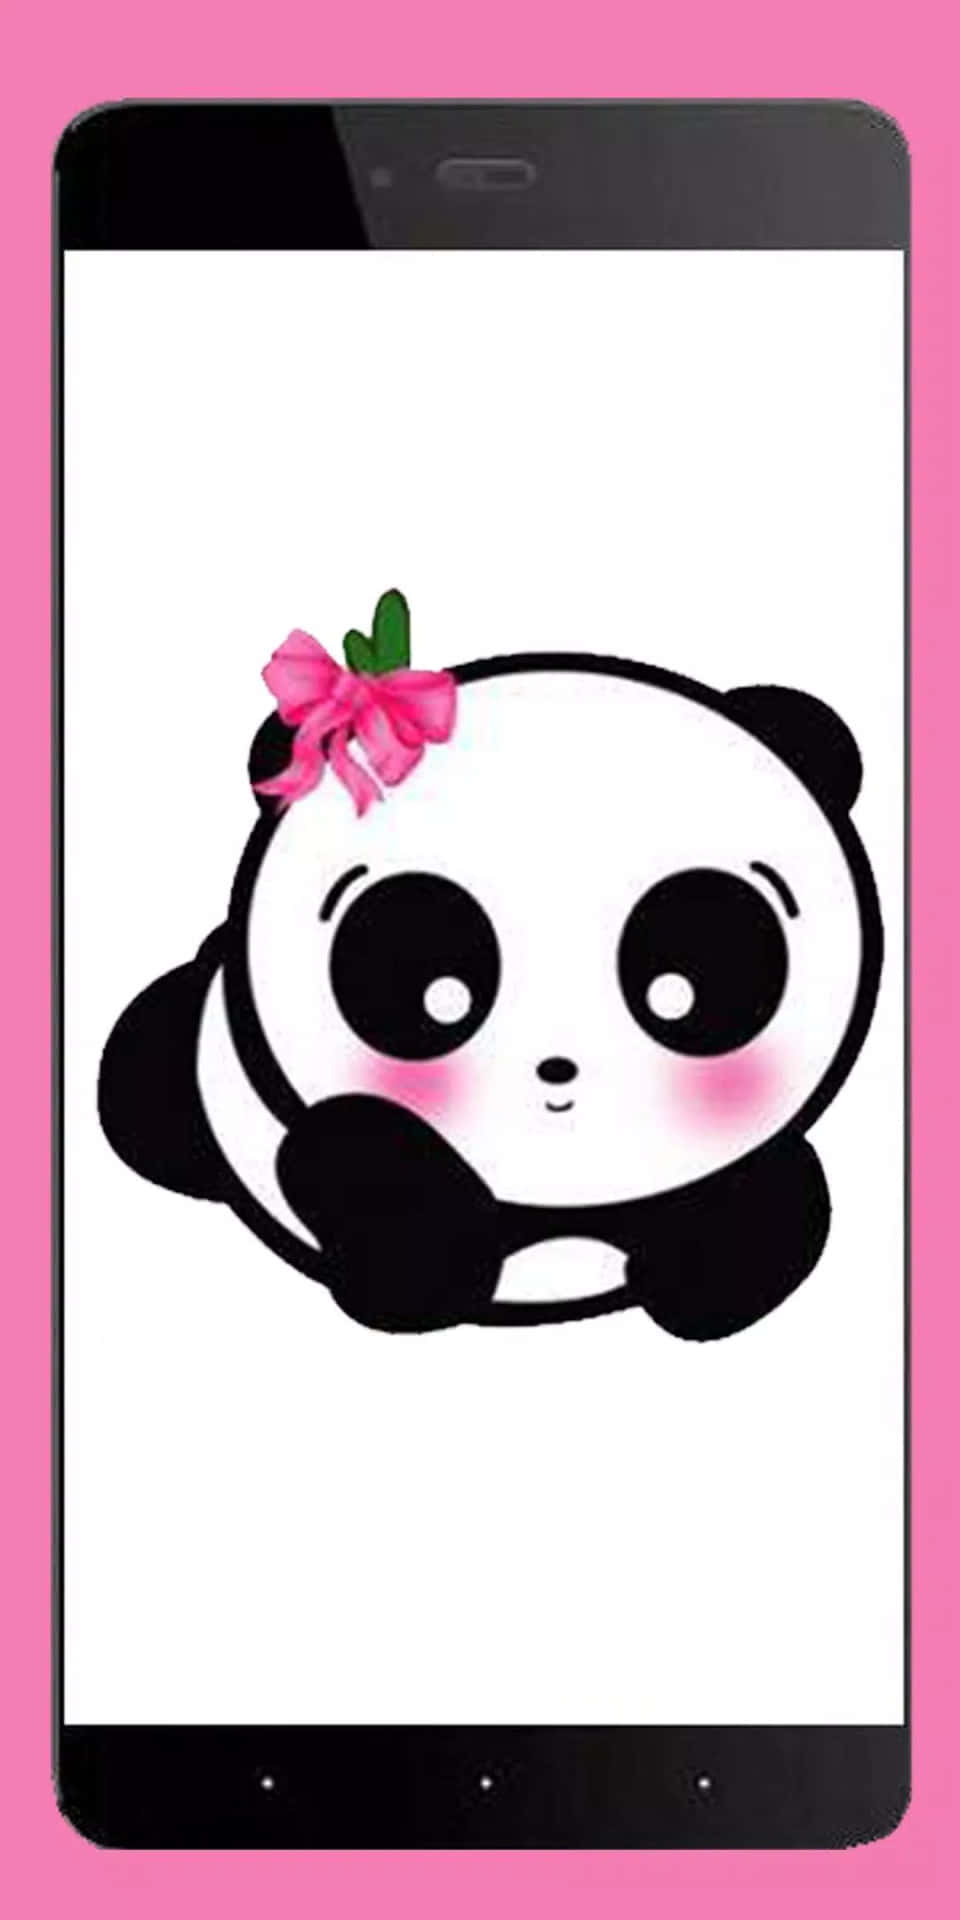 Look how adorable this Girly Panda is! Wallpaper